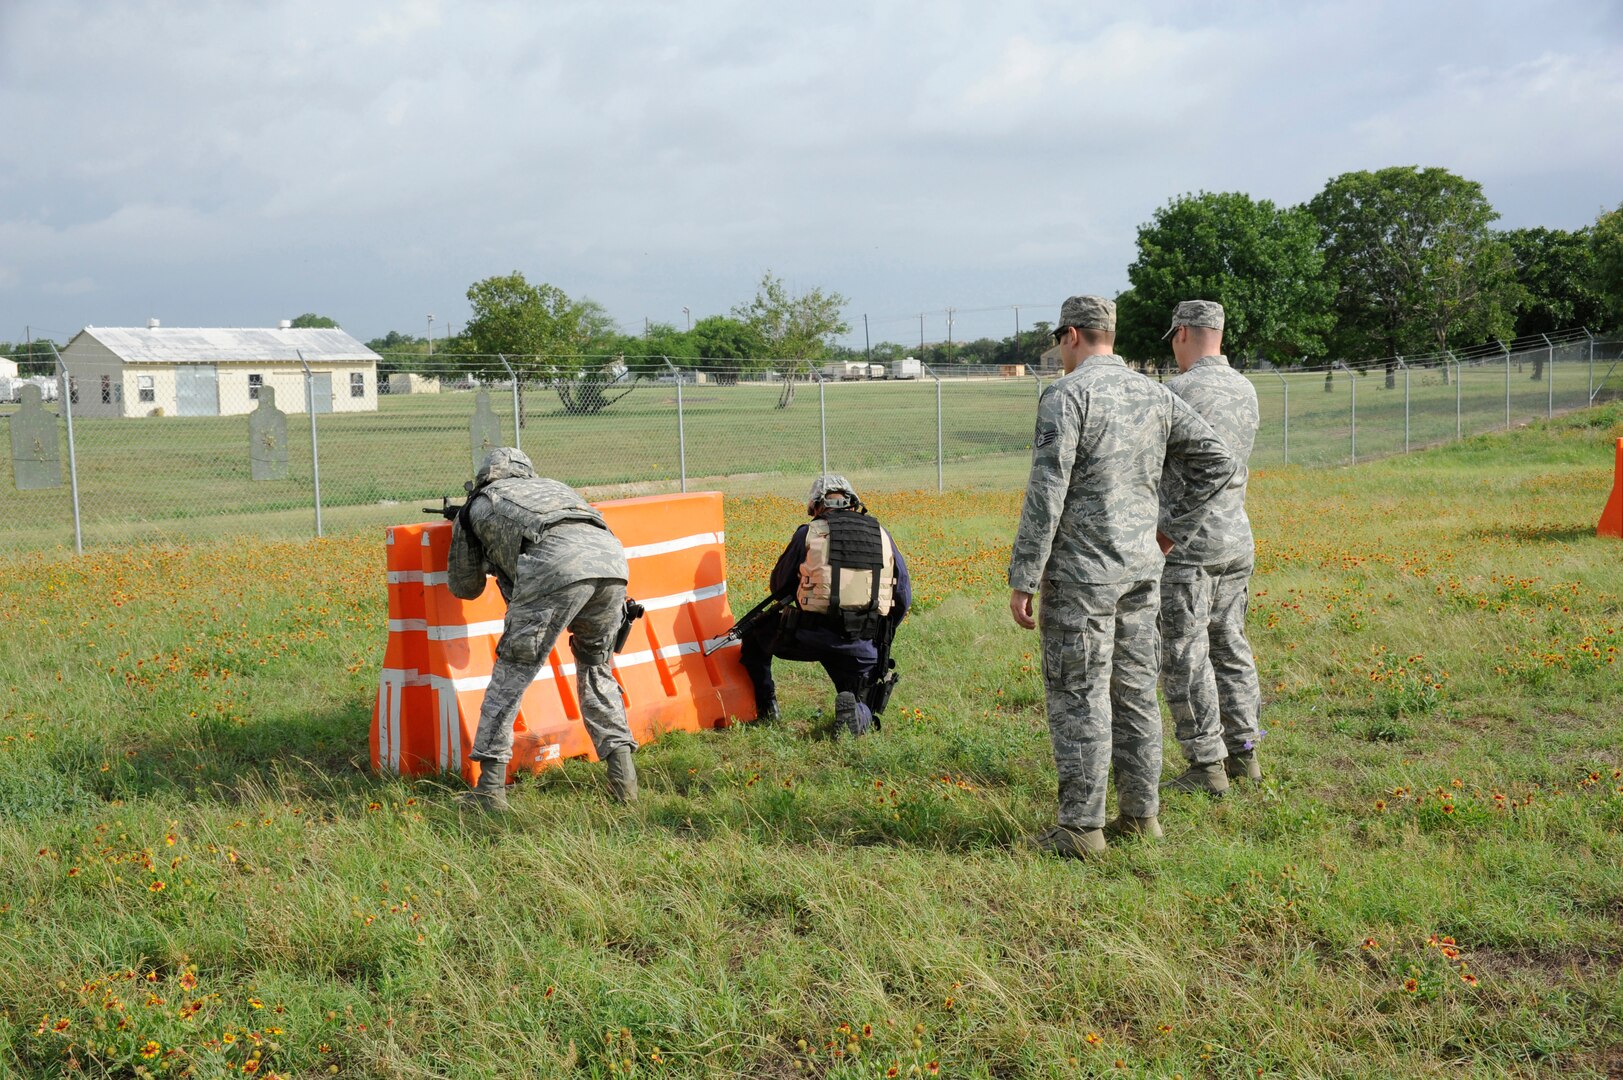 Instructors from the 902nd Security Forces Squadron provide guidance to trainees as they prepare to shoot at their targets during Shoot, Move and Communicate training at Camp Talon on Joint Base San Antonio- Randolph, June 7.  (U.S. Air Force Photo by Don Lindsey)